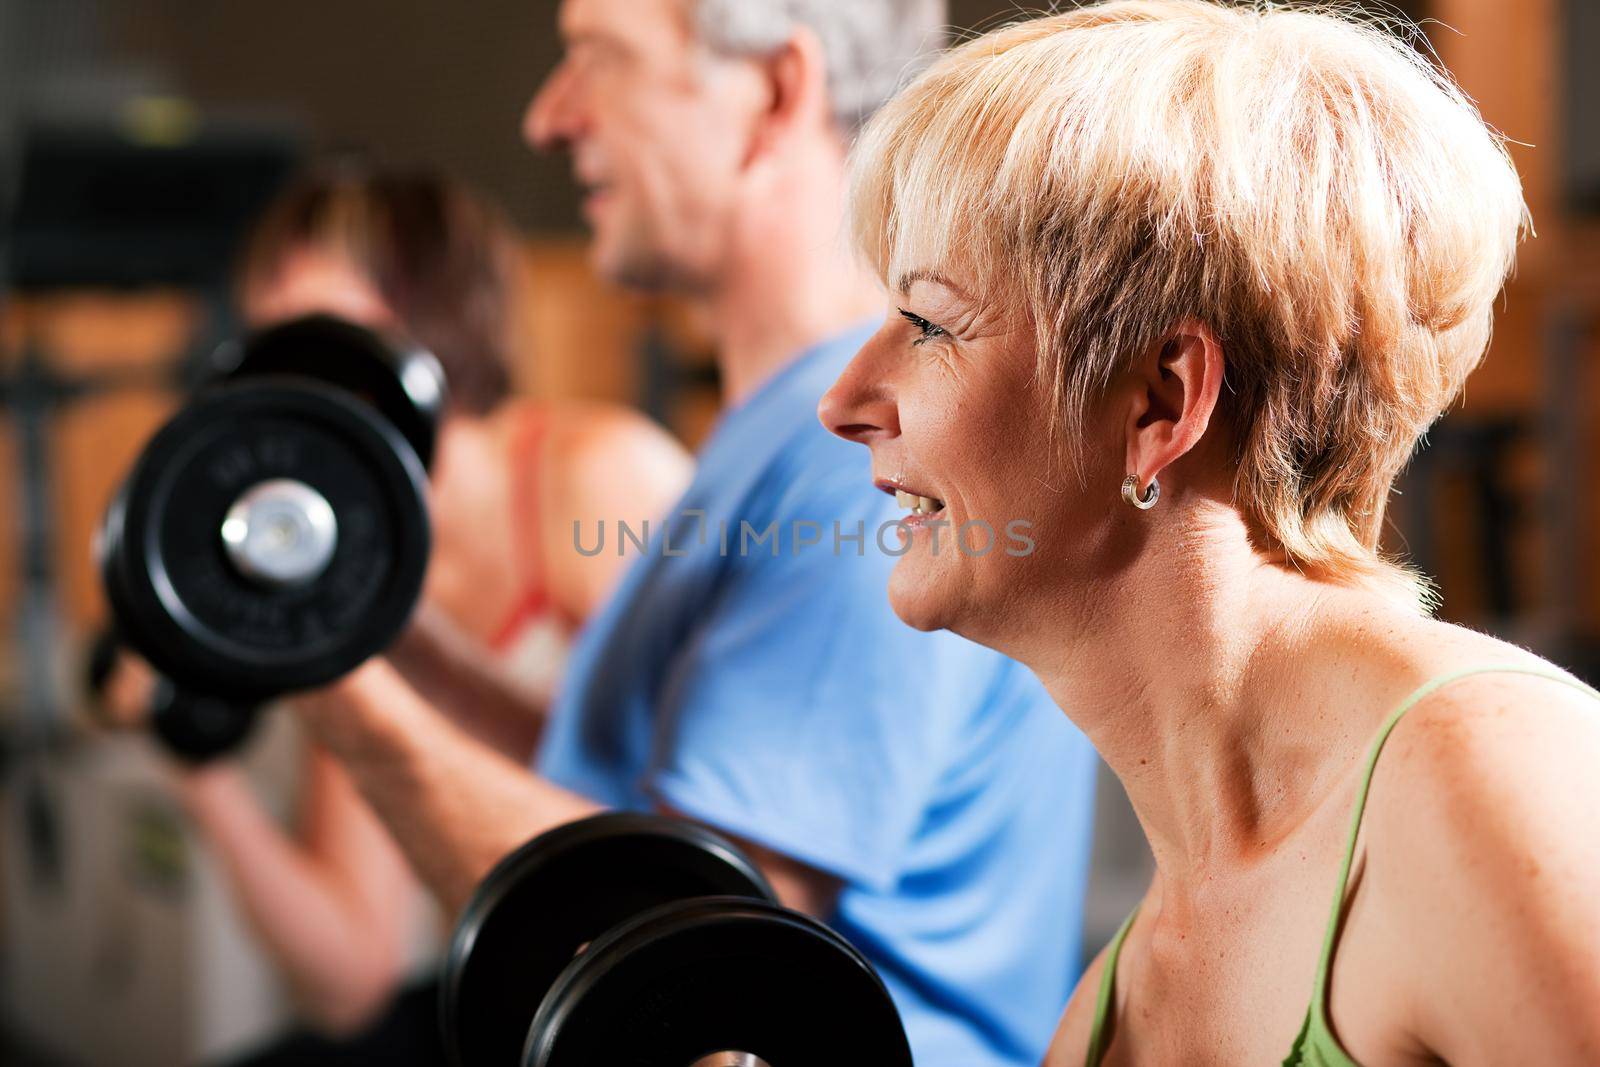 Three senior people - two women and one man - in the gym lifting dumbbells, exercising